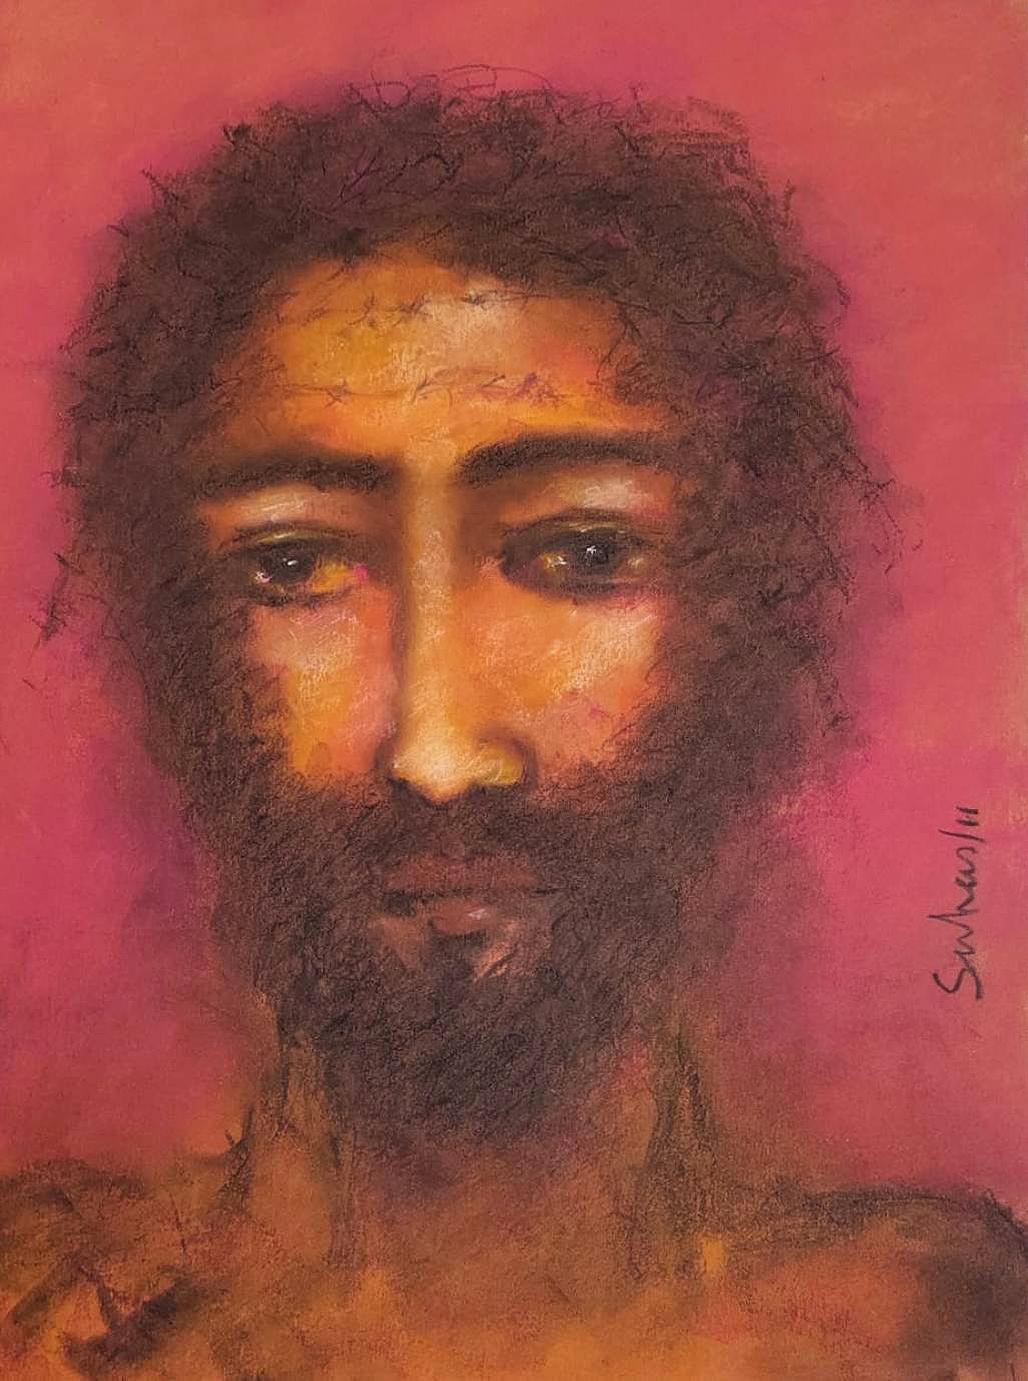 Christ, Figurative, Mixed Media on Paper by Modern Artist Suhas Roy "In Stock"